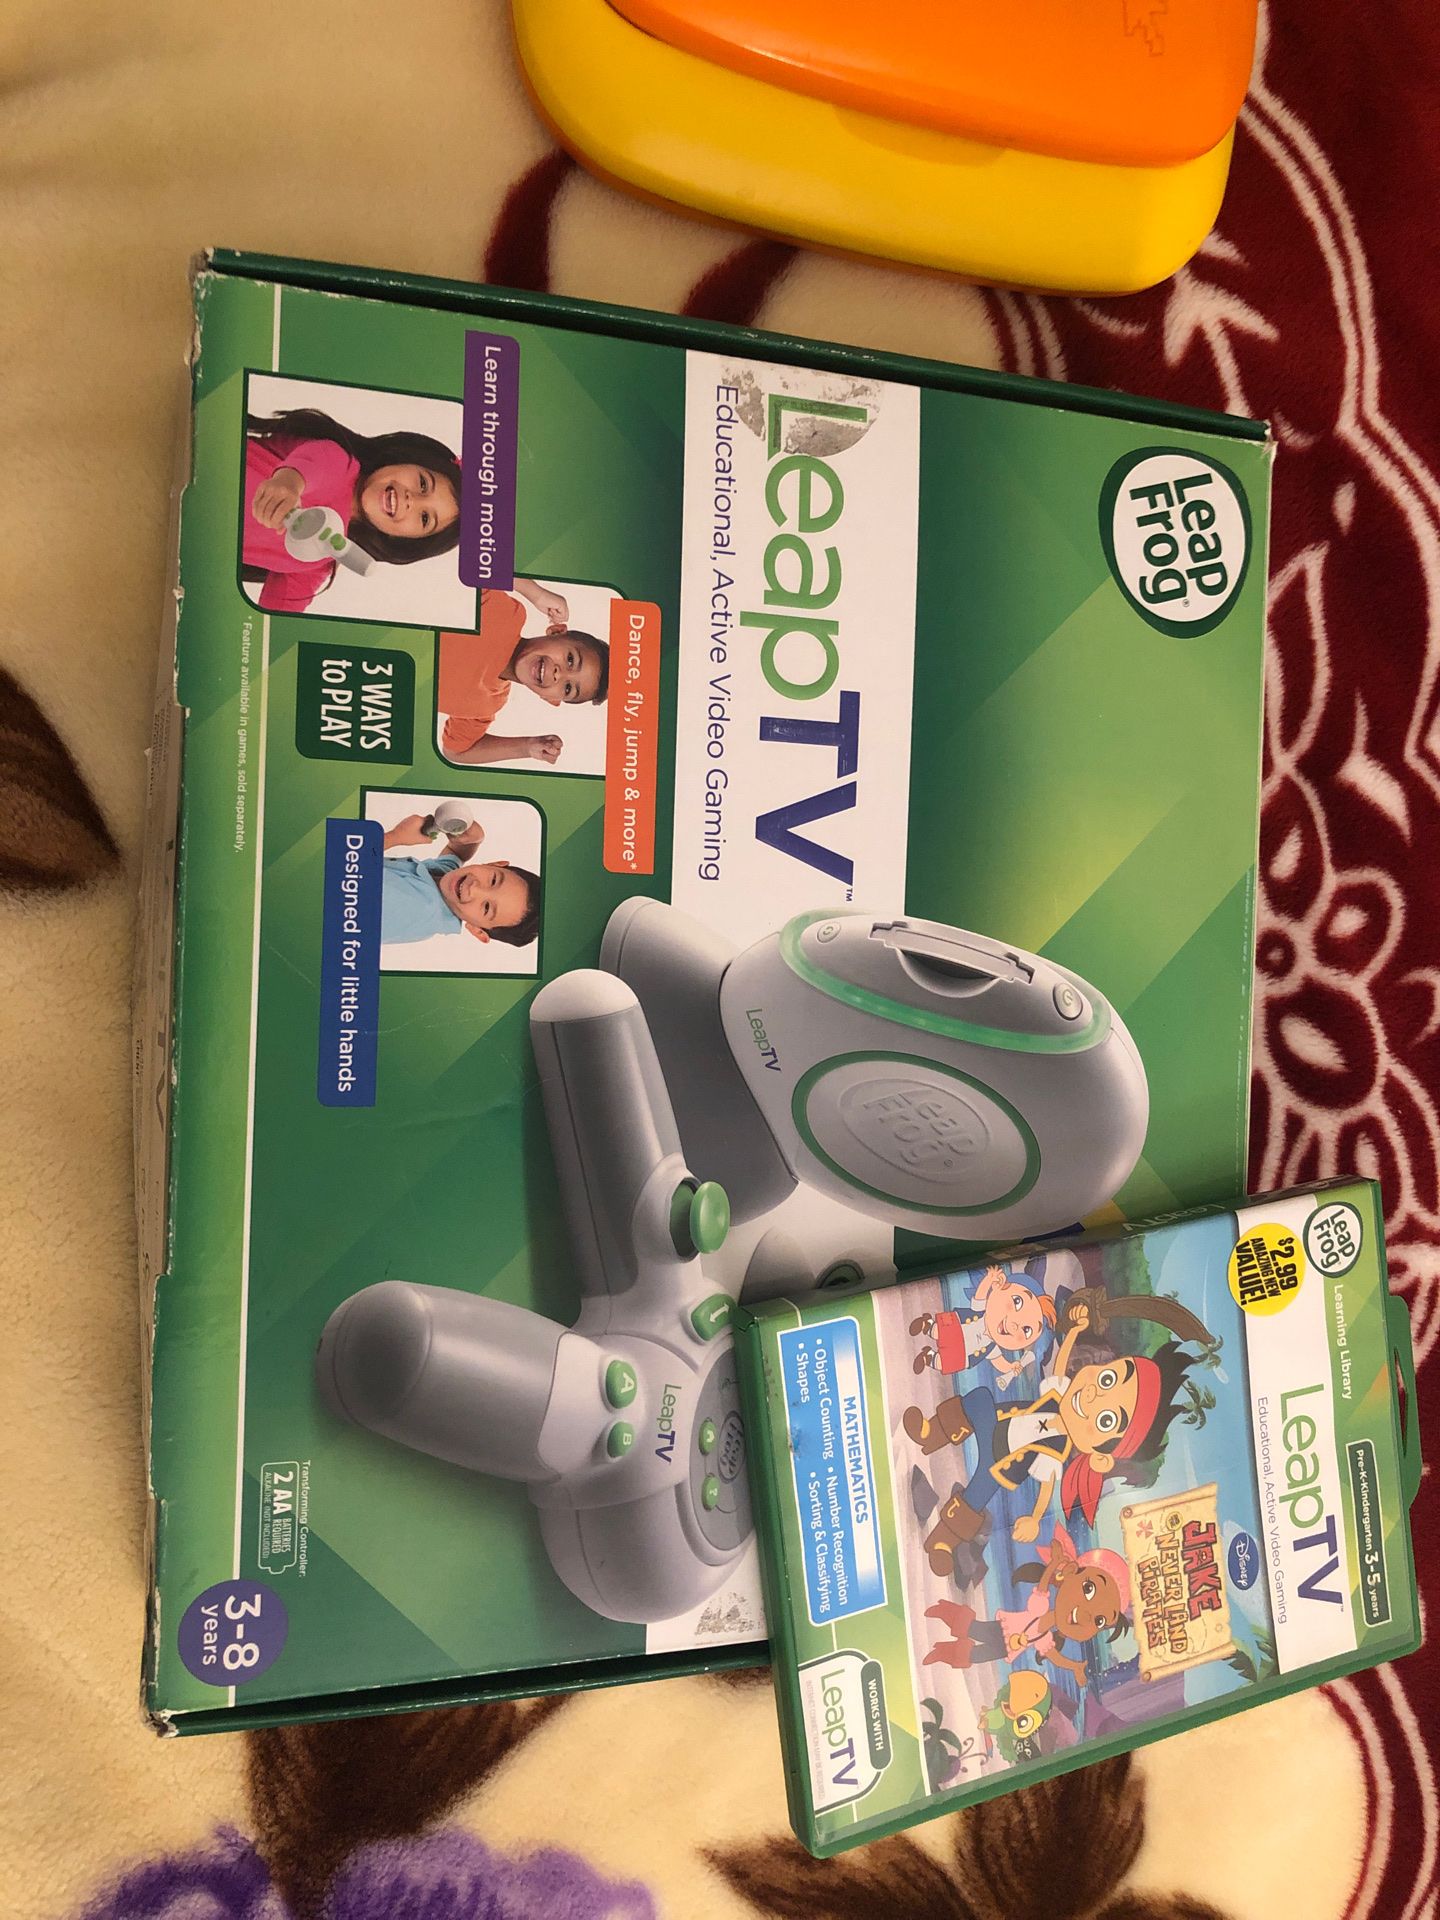 Leap TV games console with so many kids games